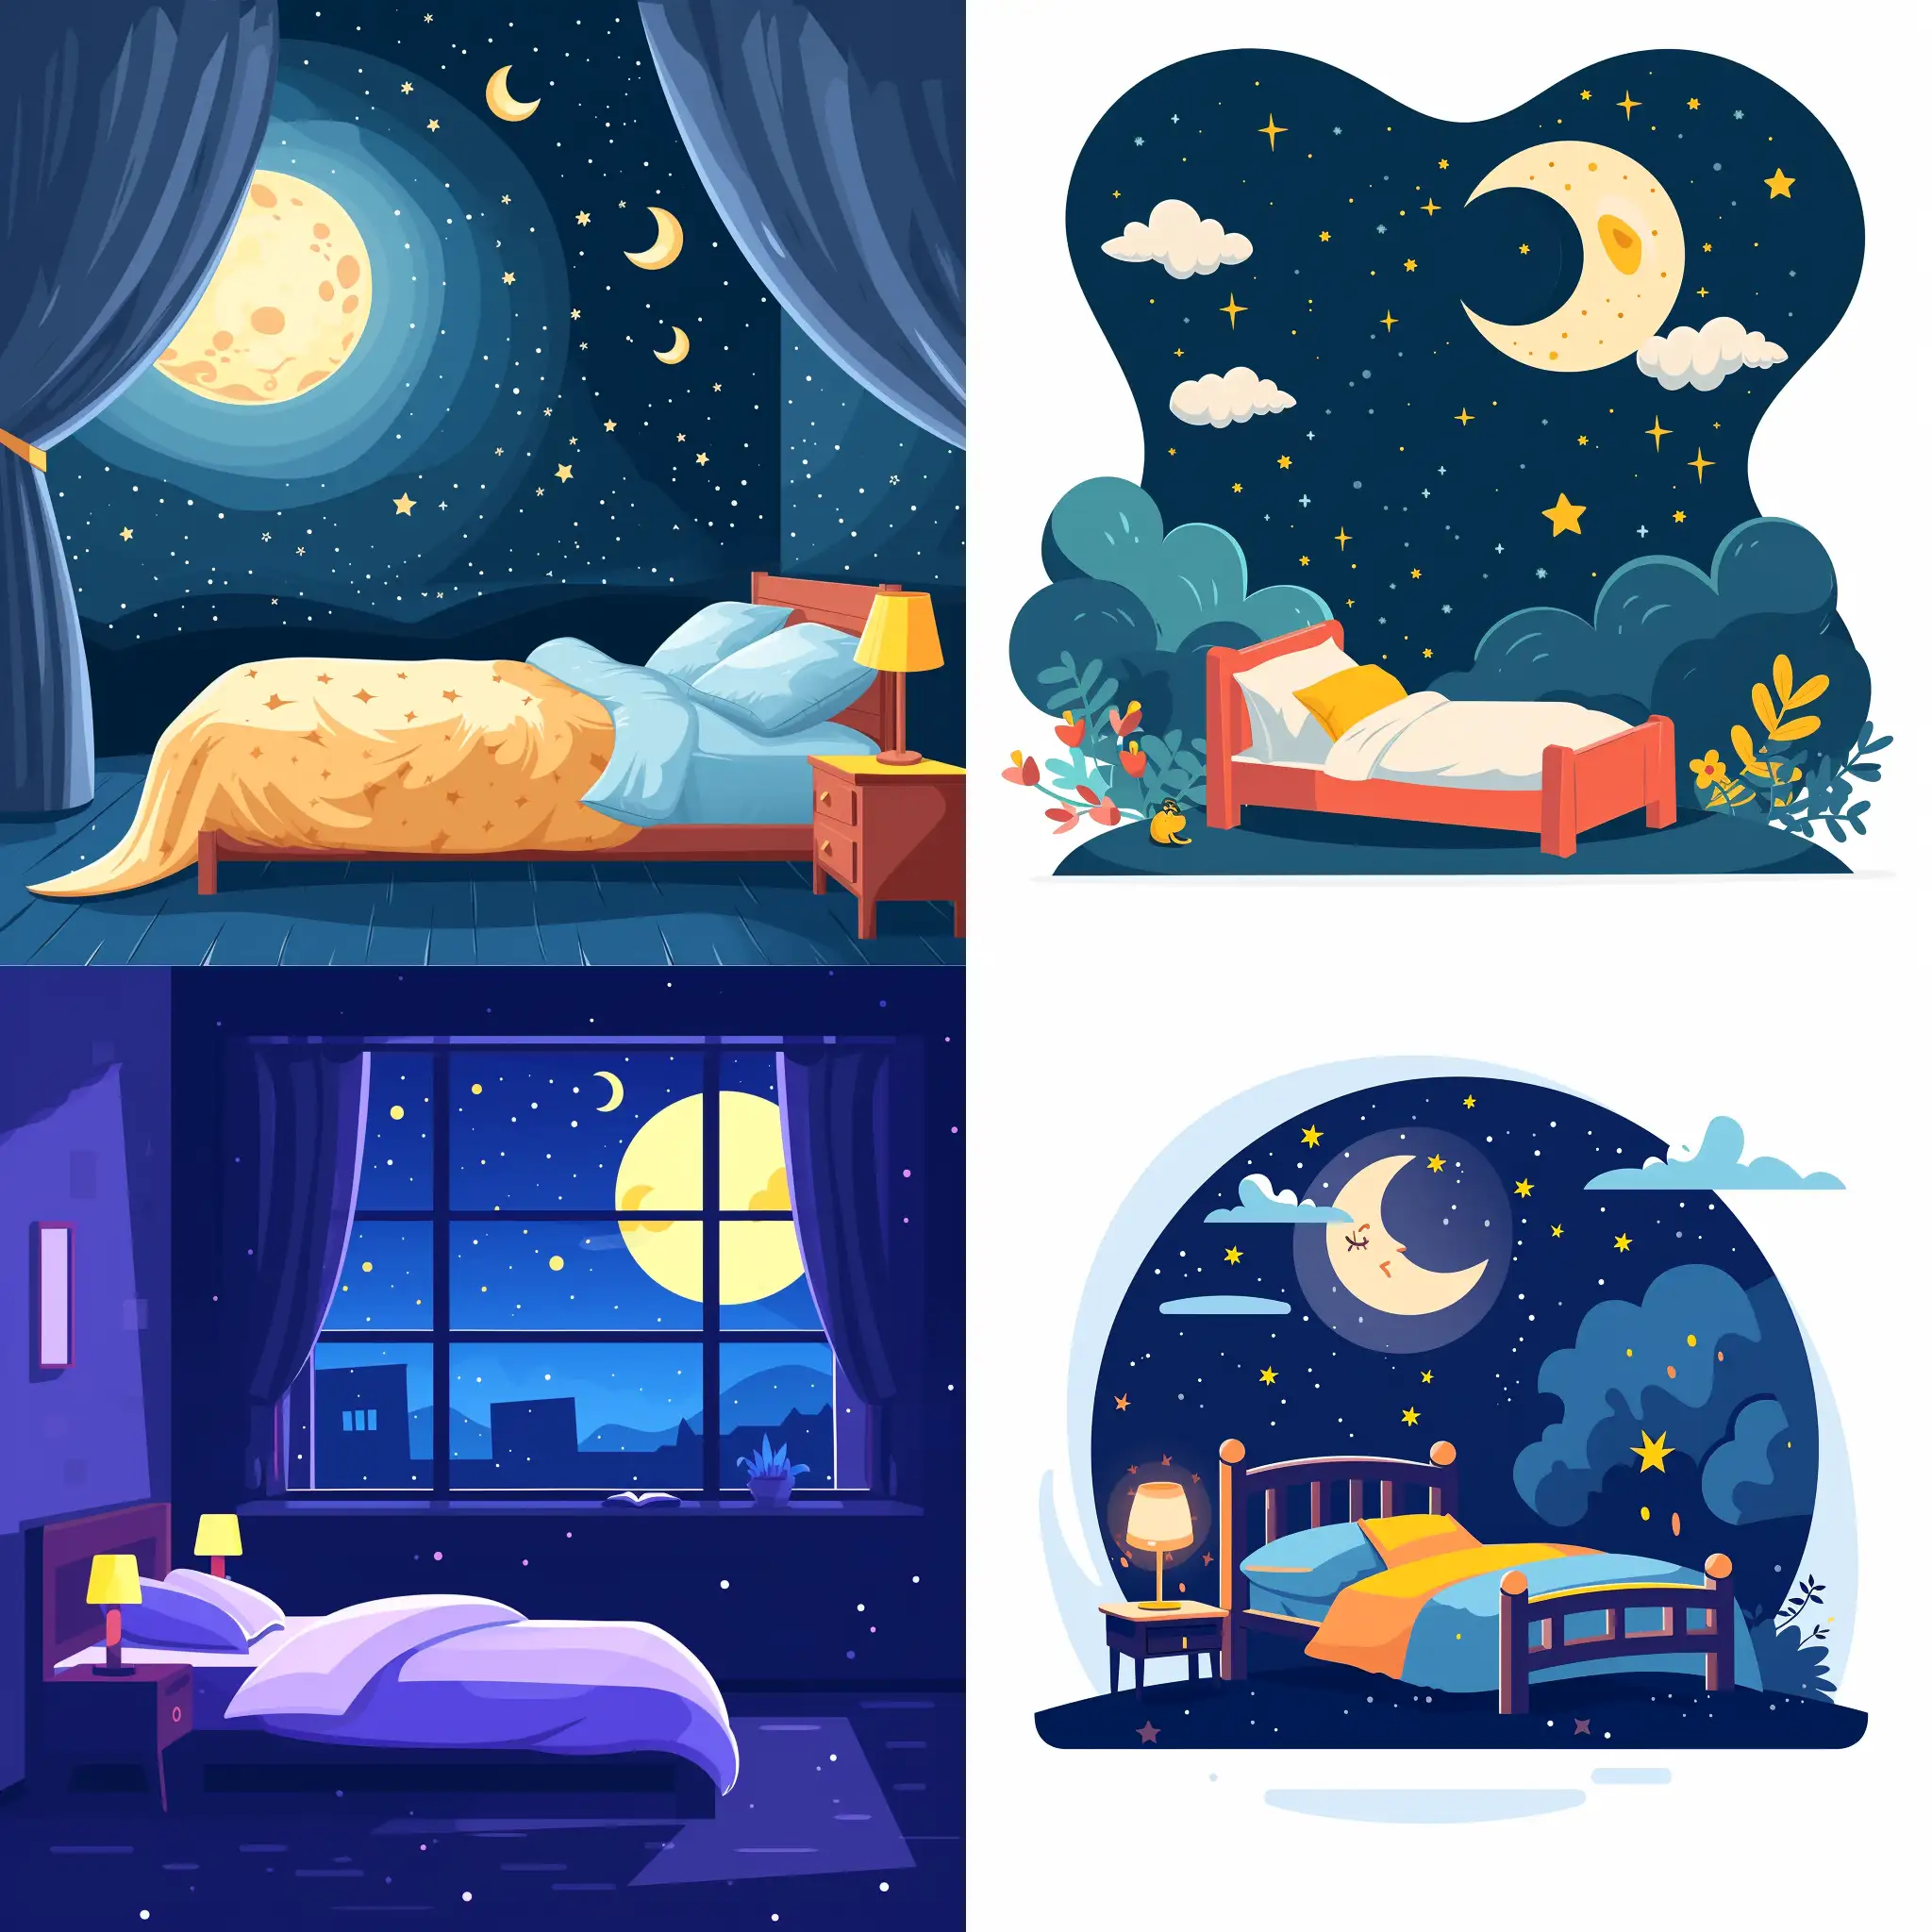 Cozy-Night-Scene-in-Flat-Style-with-HighQuality-Details